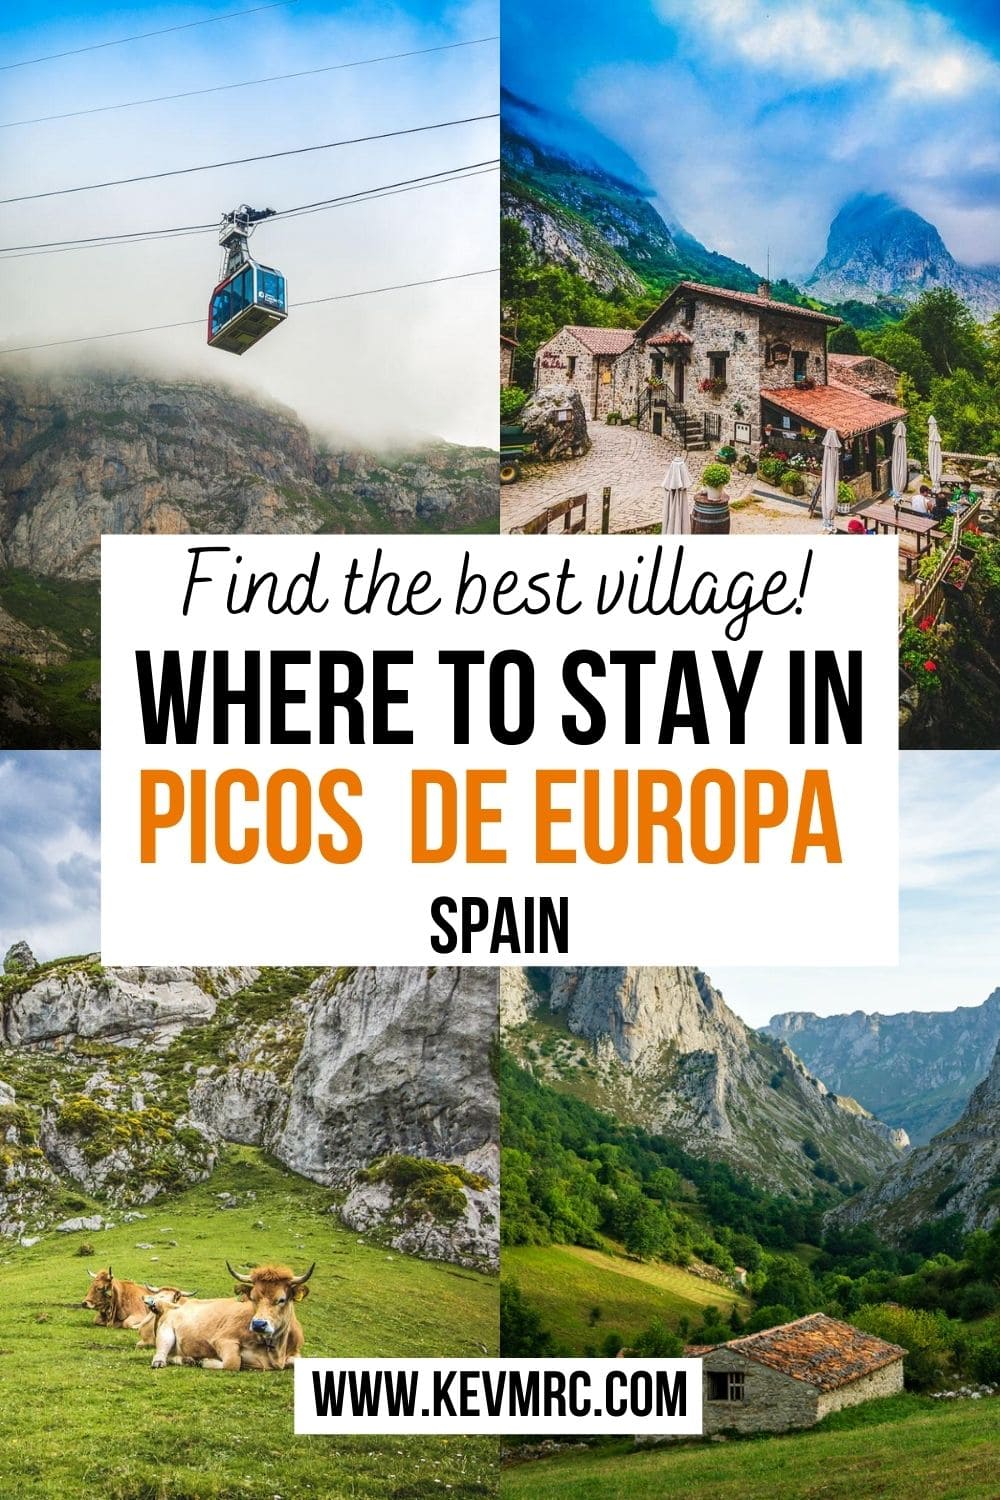 Where to stay in Picos de Europa Spain. As you can imagine, it's a real paradise for hikers, nature lovers and adventurers looking for outdoor activities, and it can be difficult to find an accommodation, especially during the high season. Let's find the best town and hotel where to stay in Picos de Europa. picos de europa hotel | picos de europa camping | spain national park | picos de europa hiking